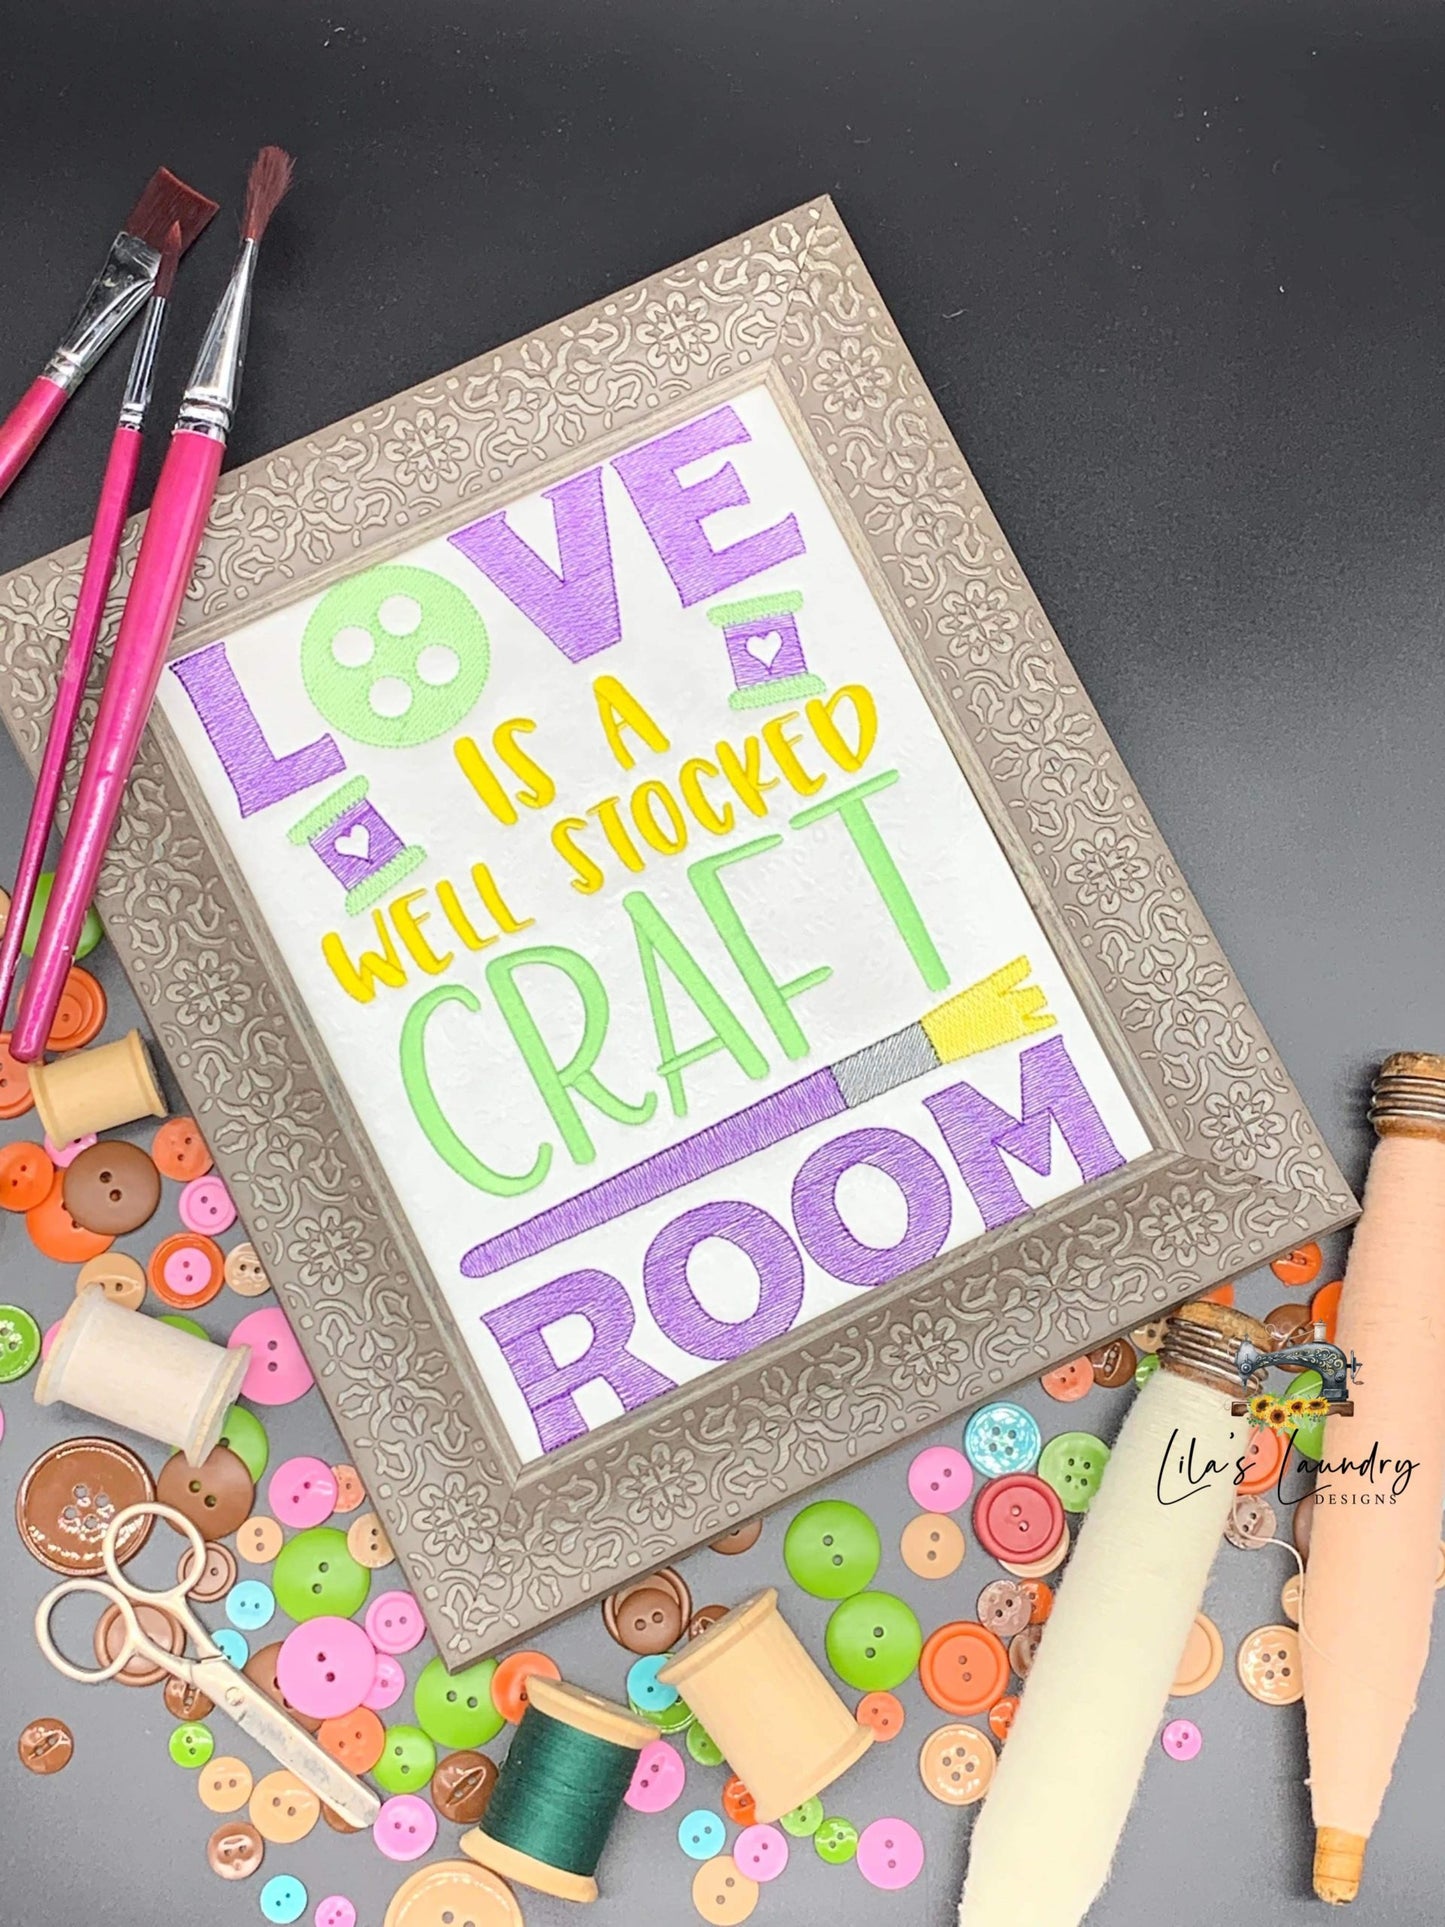 Well Stocked Craft Room - 3 sizes- Digital Embroidery Design